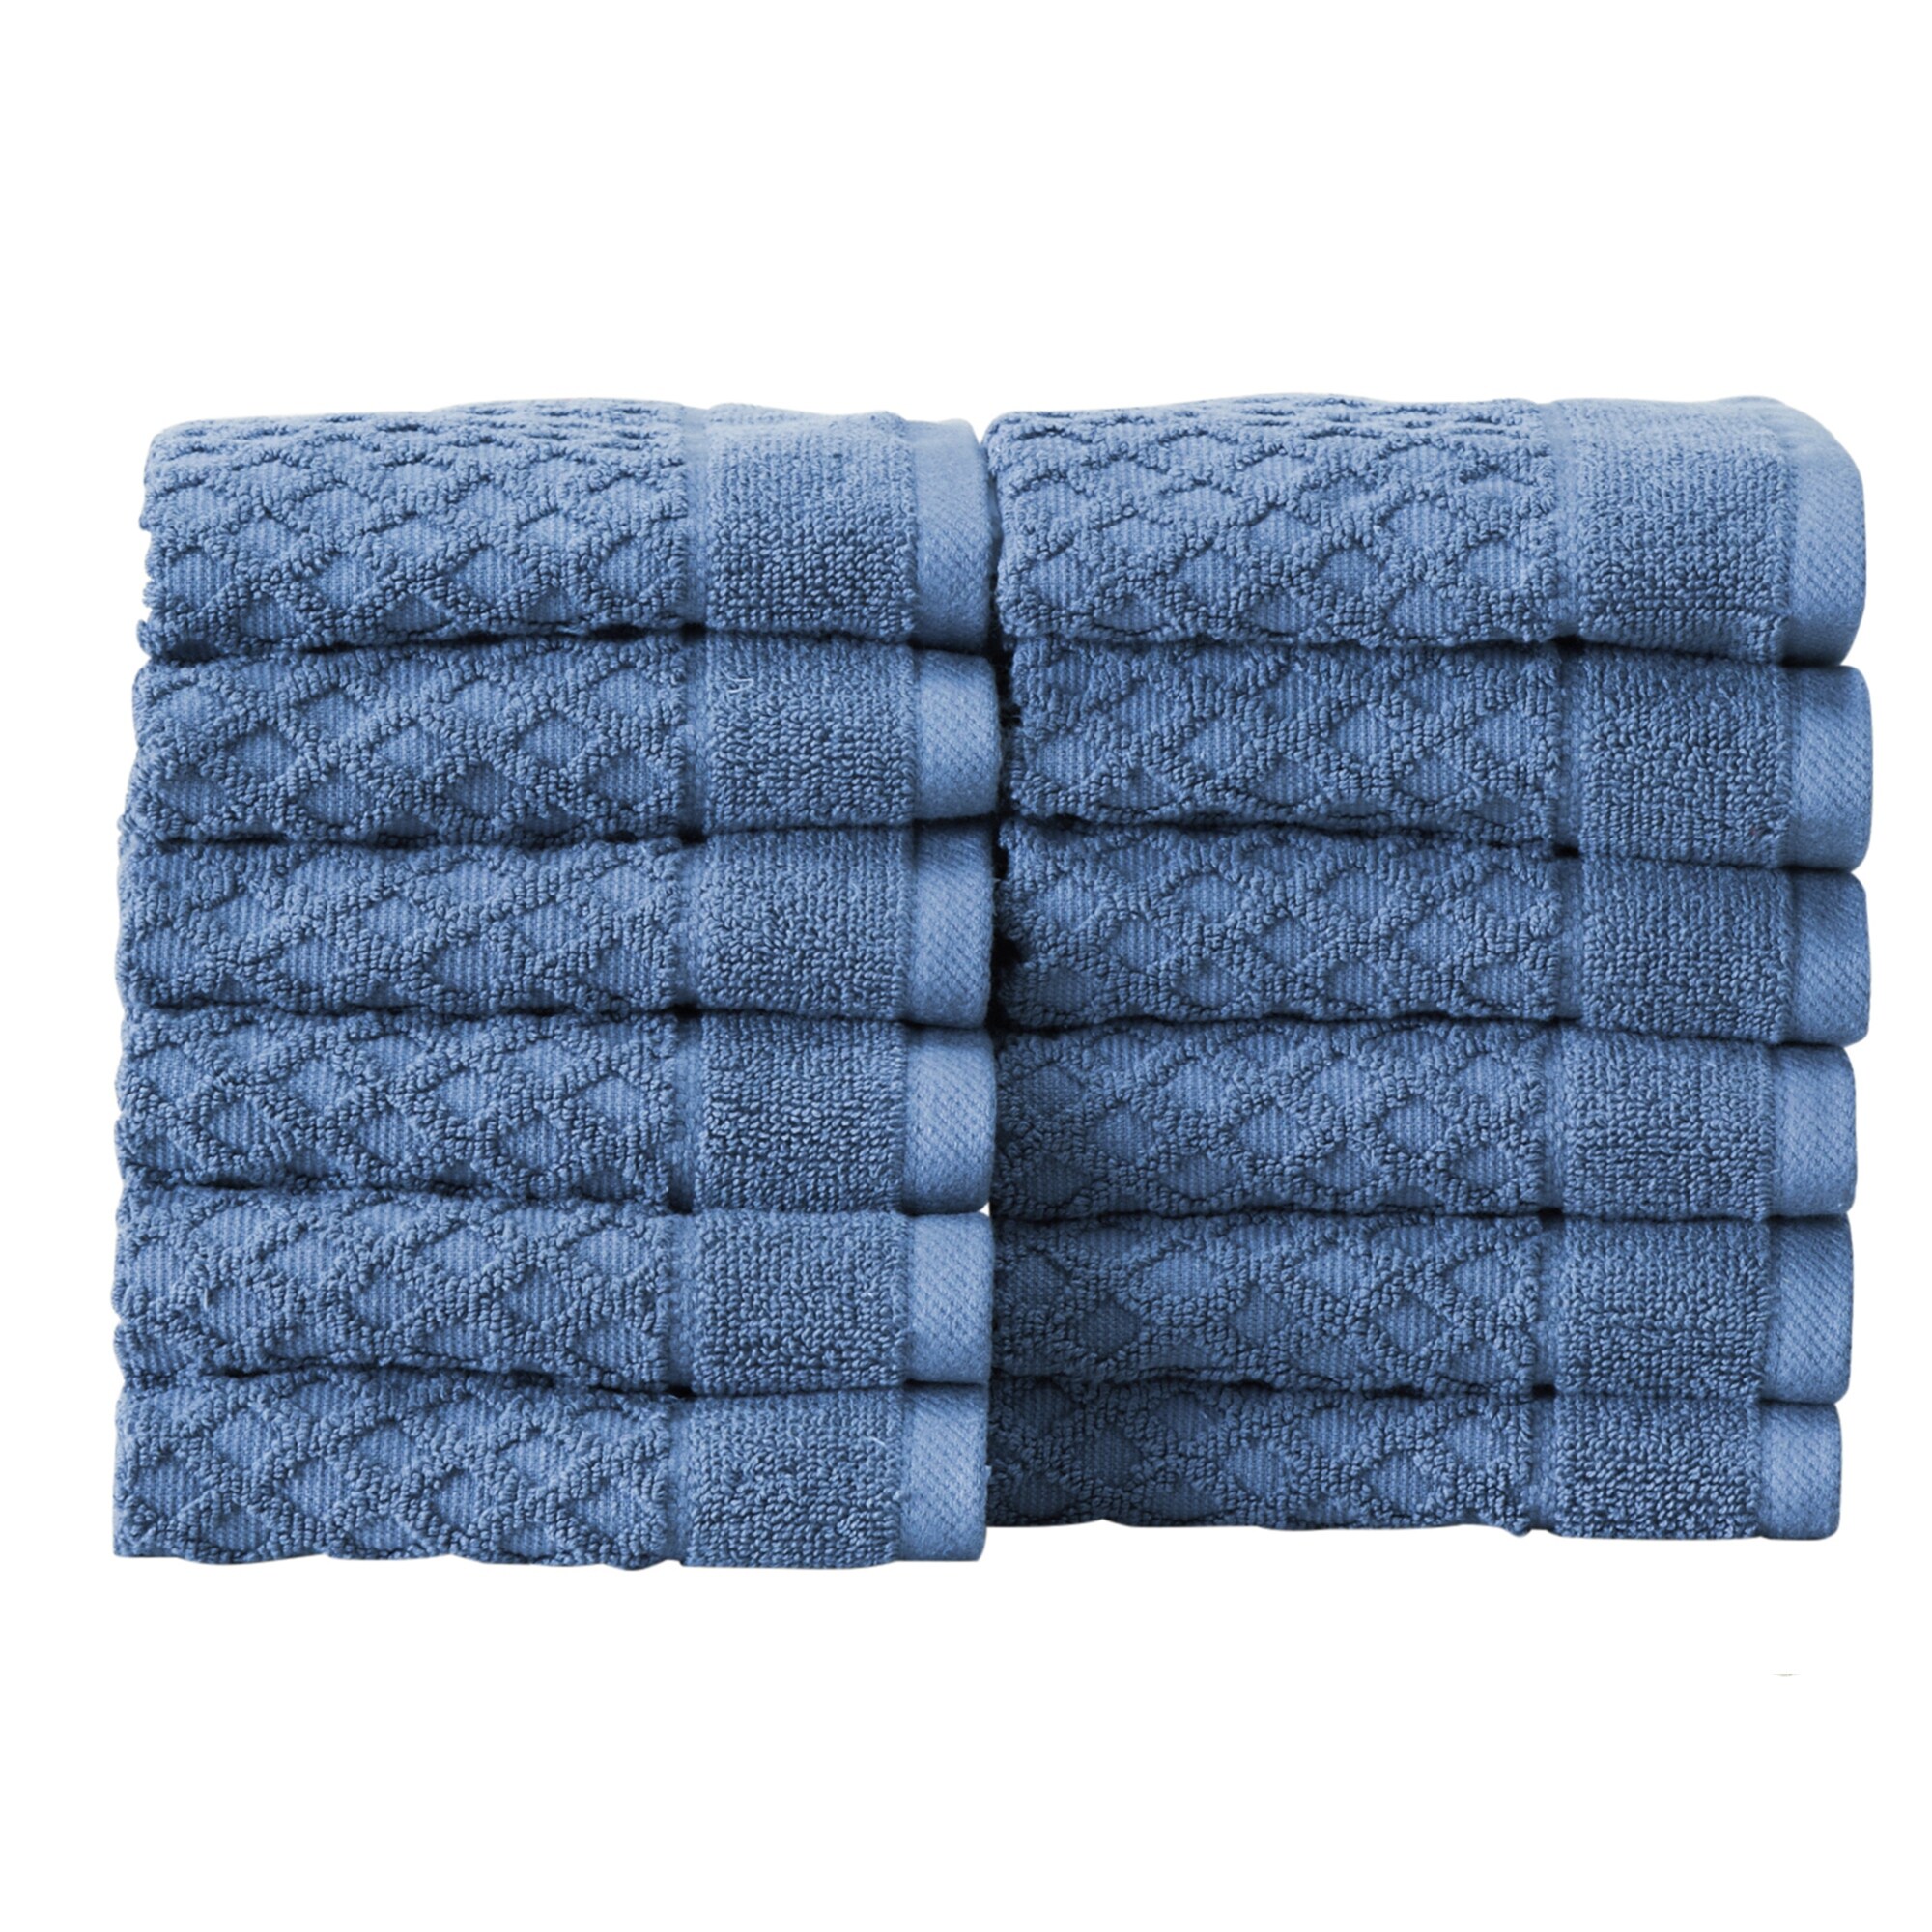 https://ak1.ostkcdn.com/images/products/is/images/direct/9b821dcfcc5f60fb63b4ab2c4065c1eb77b100ae/Great-Bay-Home-Cotton-Diamond-Textured-Towel-Set.jpg